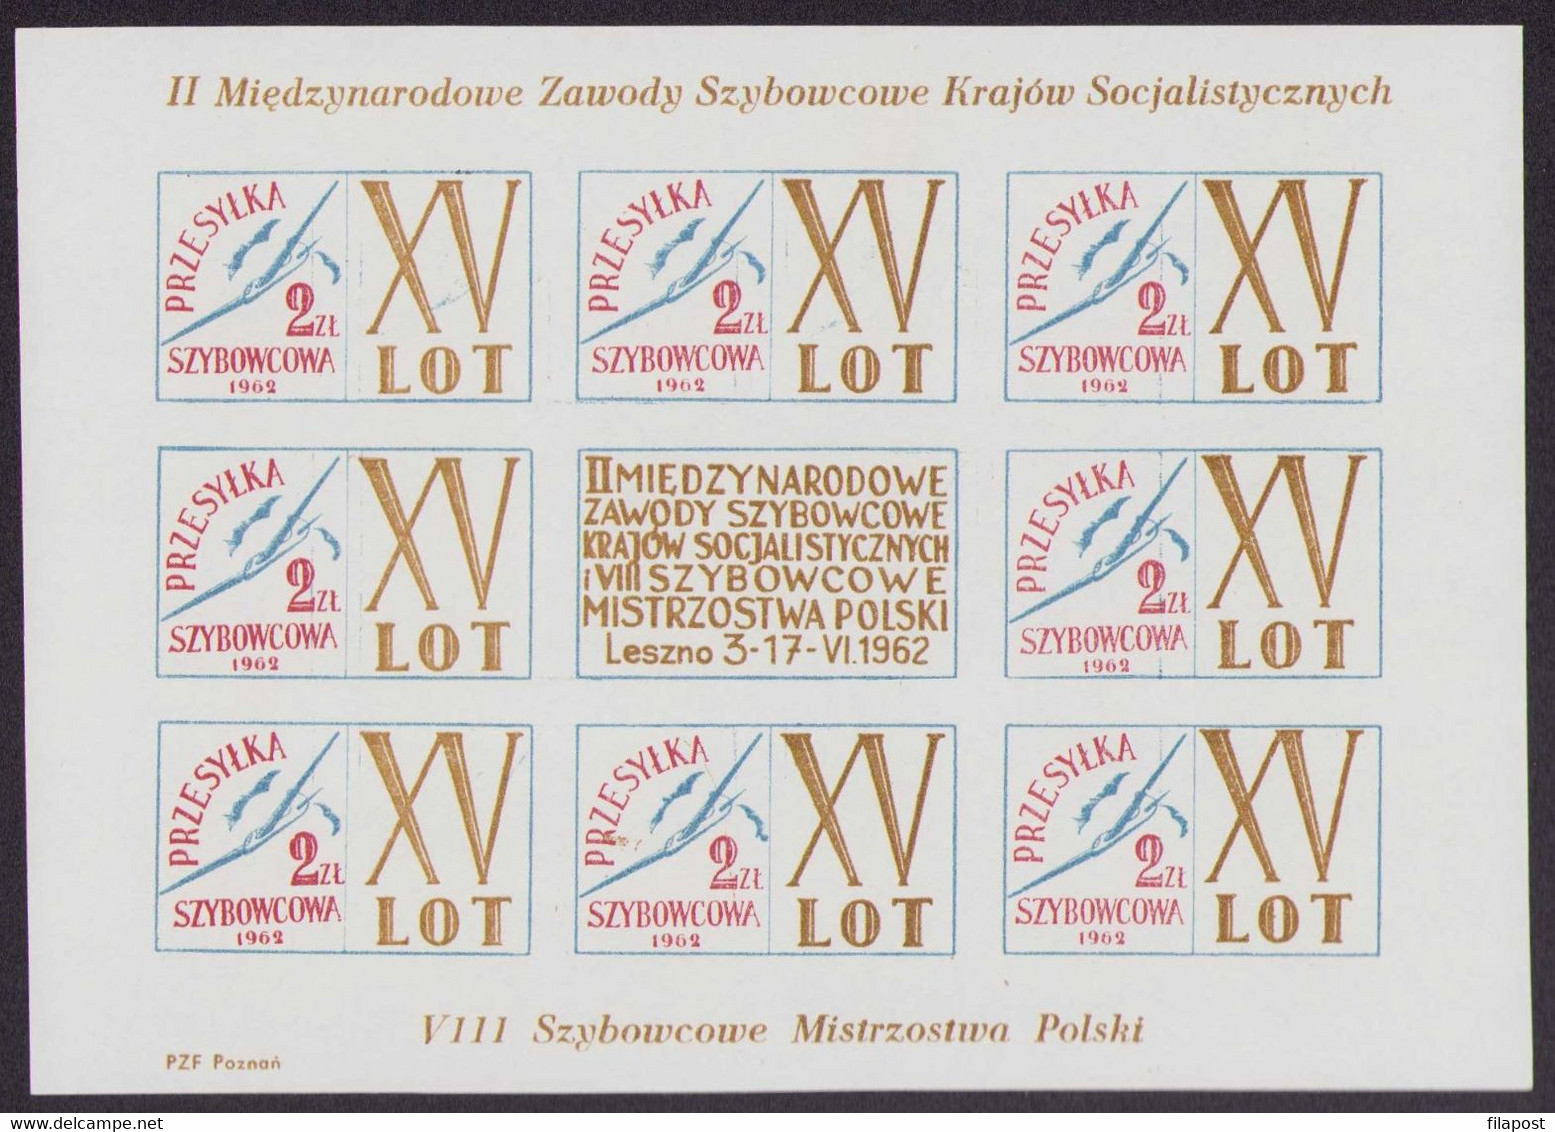 POLAND 1962 Interational & Polish Gliding Championships / Socialist Countries, LOT, Airplane, Plane, Full Sheet MNH**P71 - Feuilles Complètes